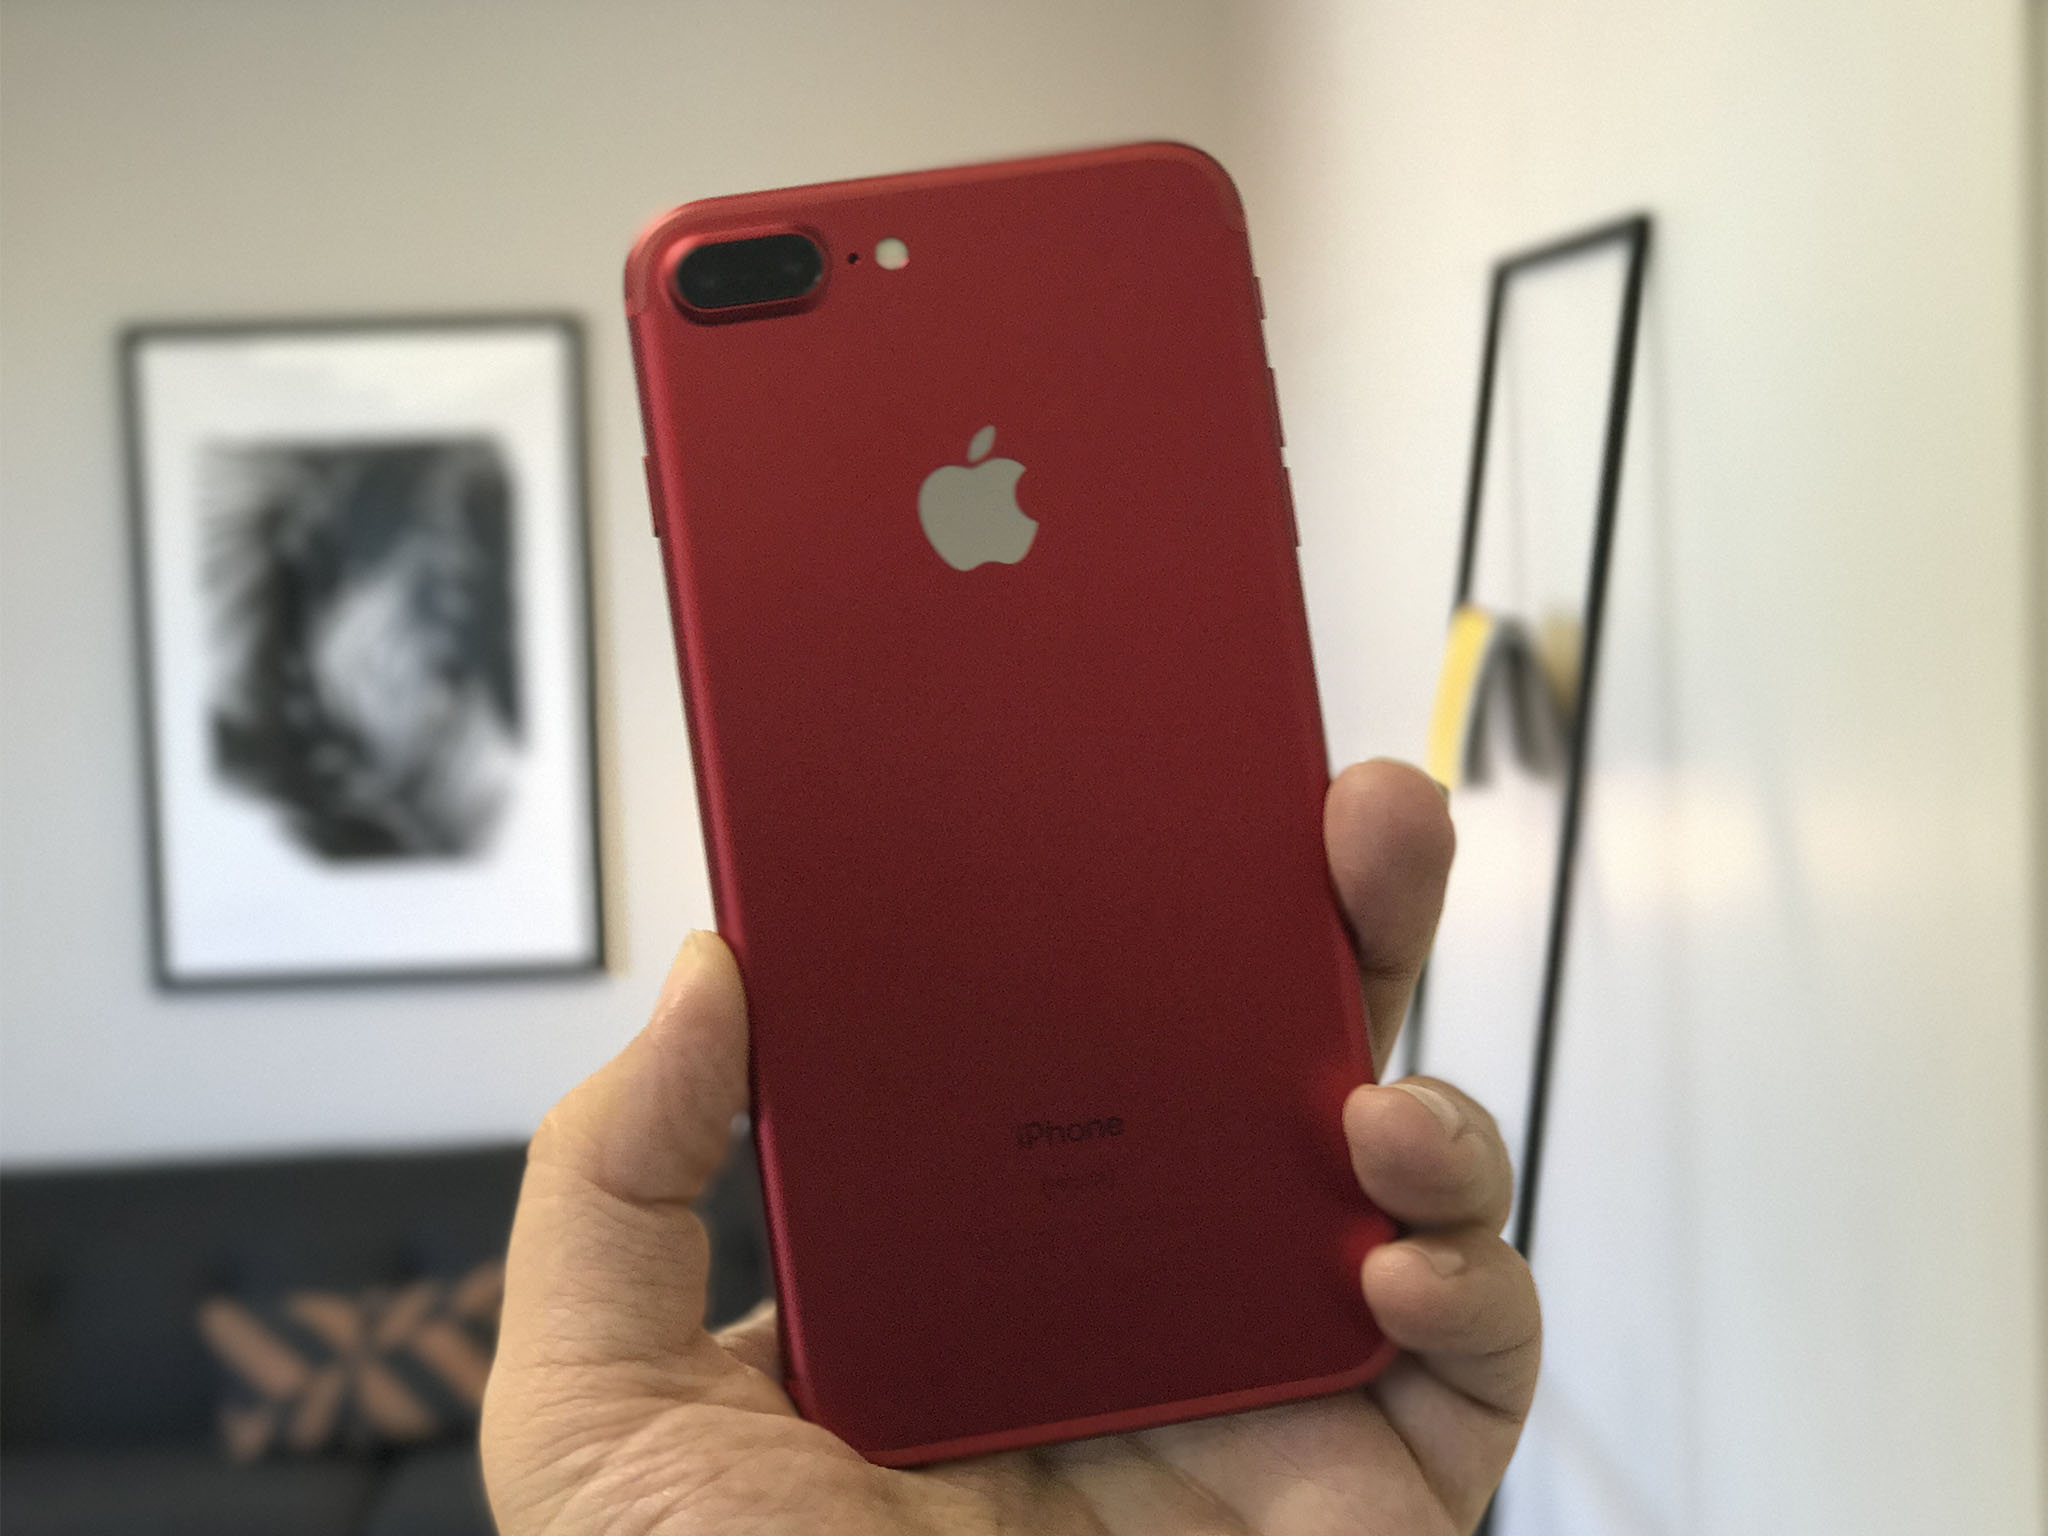 (Product) RED iPhone 7: Unboxing and hands-on! | iMore